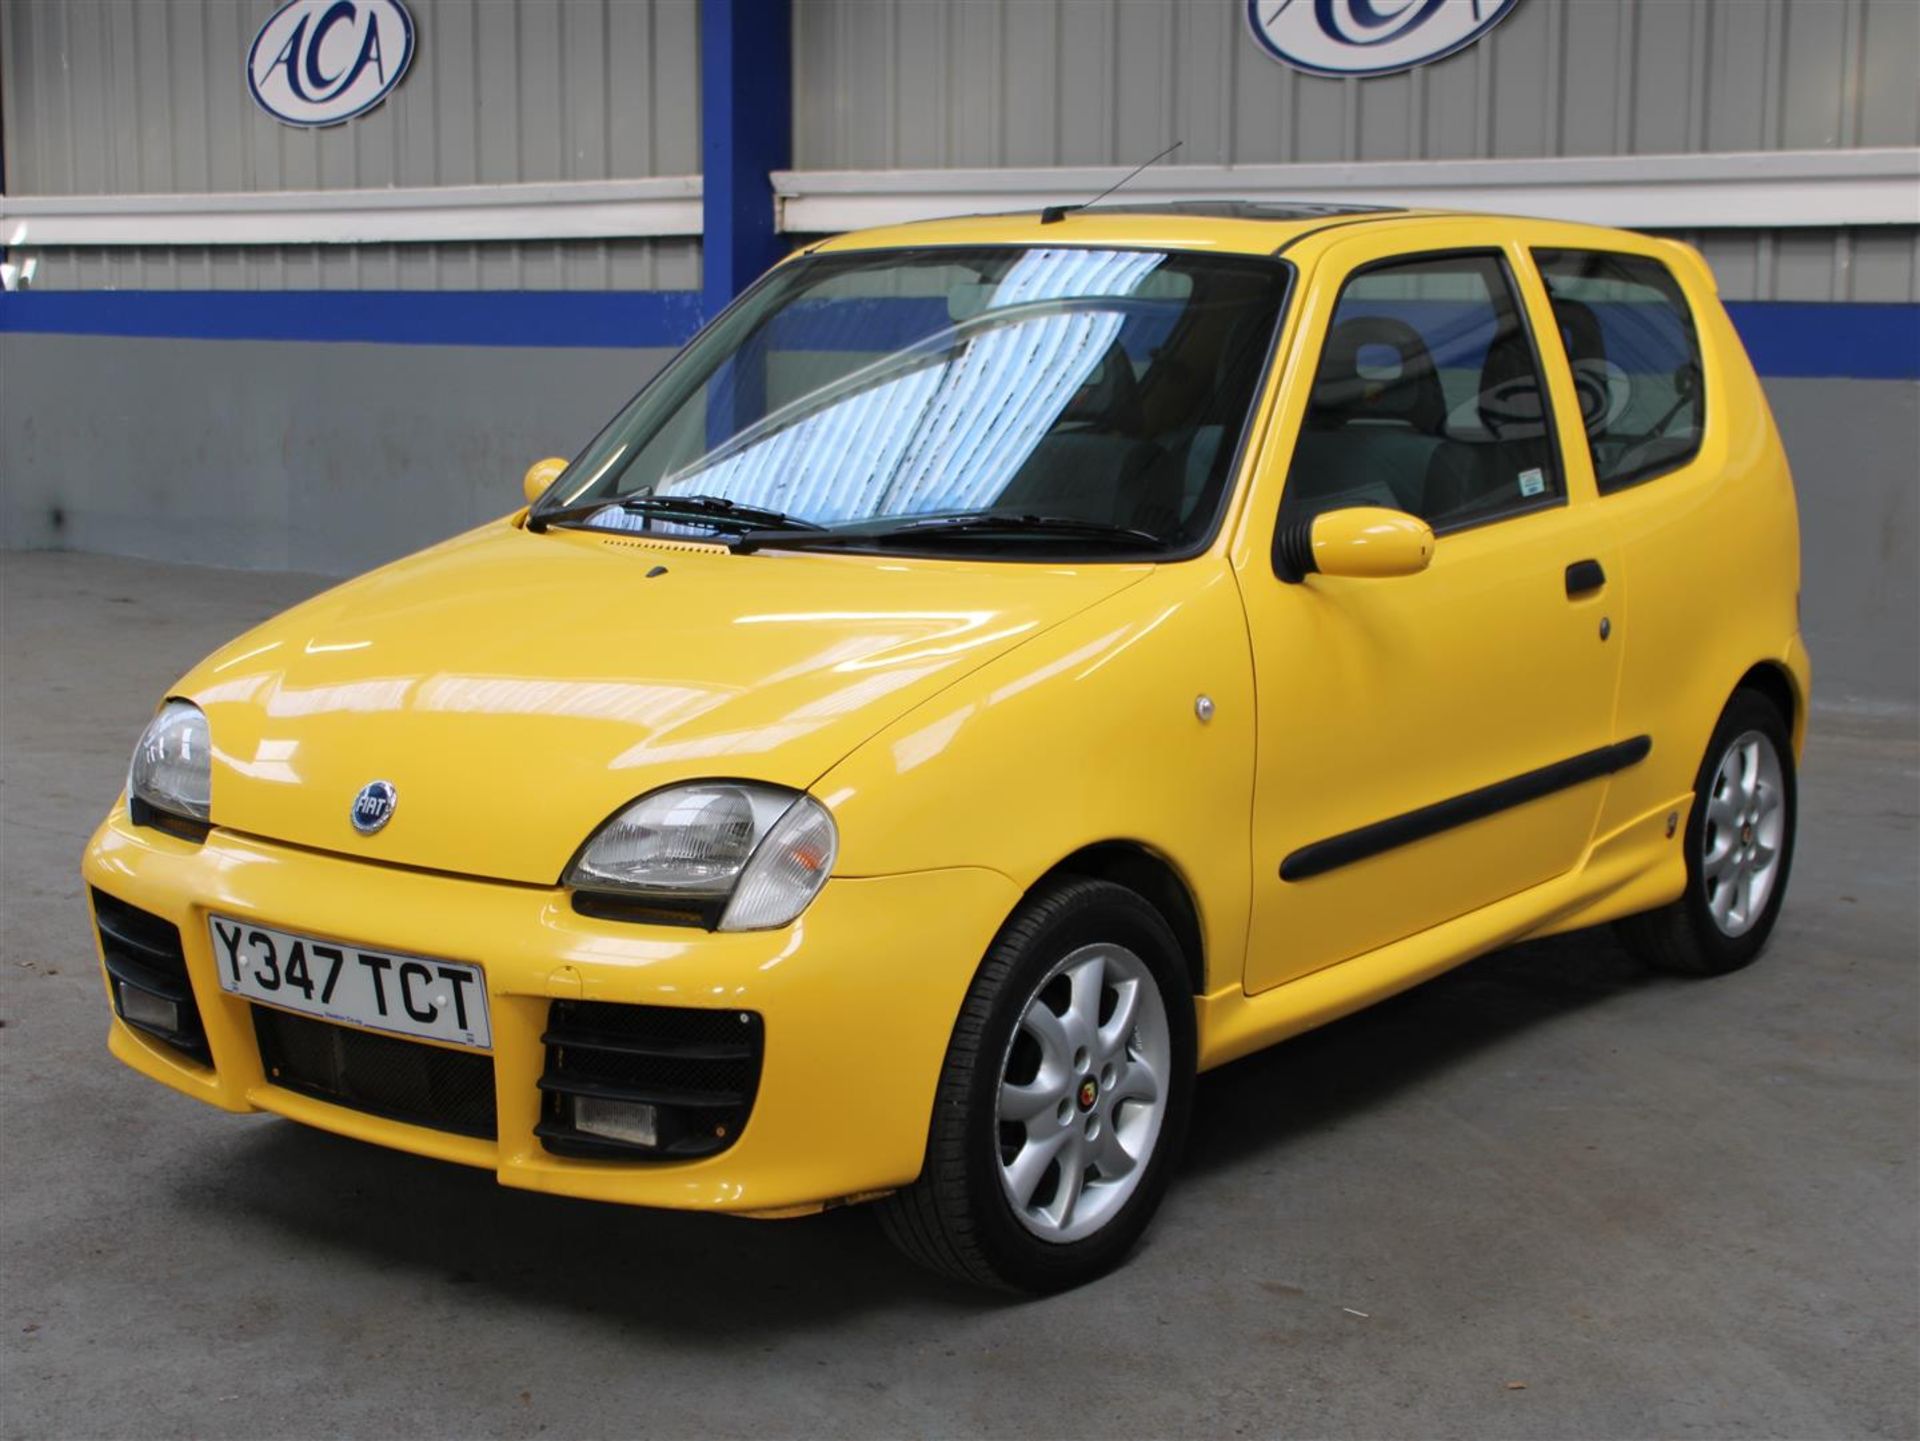 2001 Fiat Seicento Sporting - Image 3 of 20